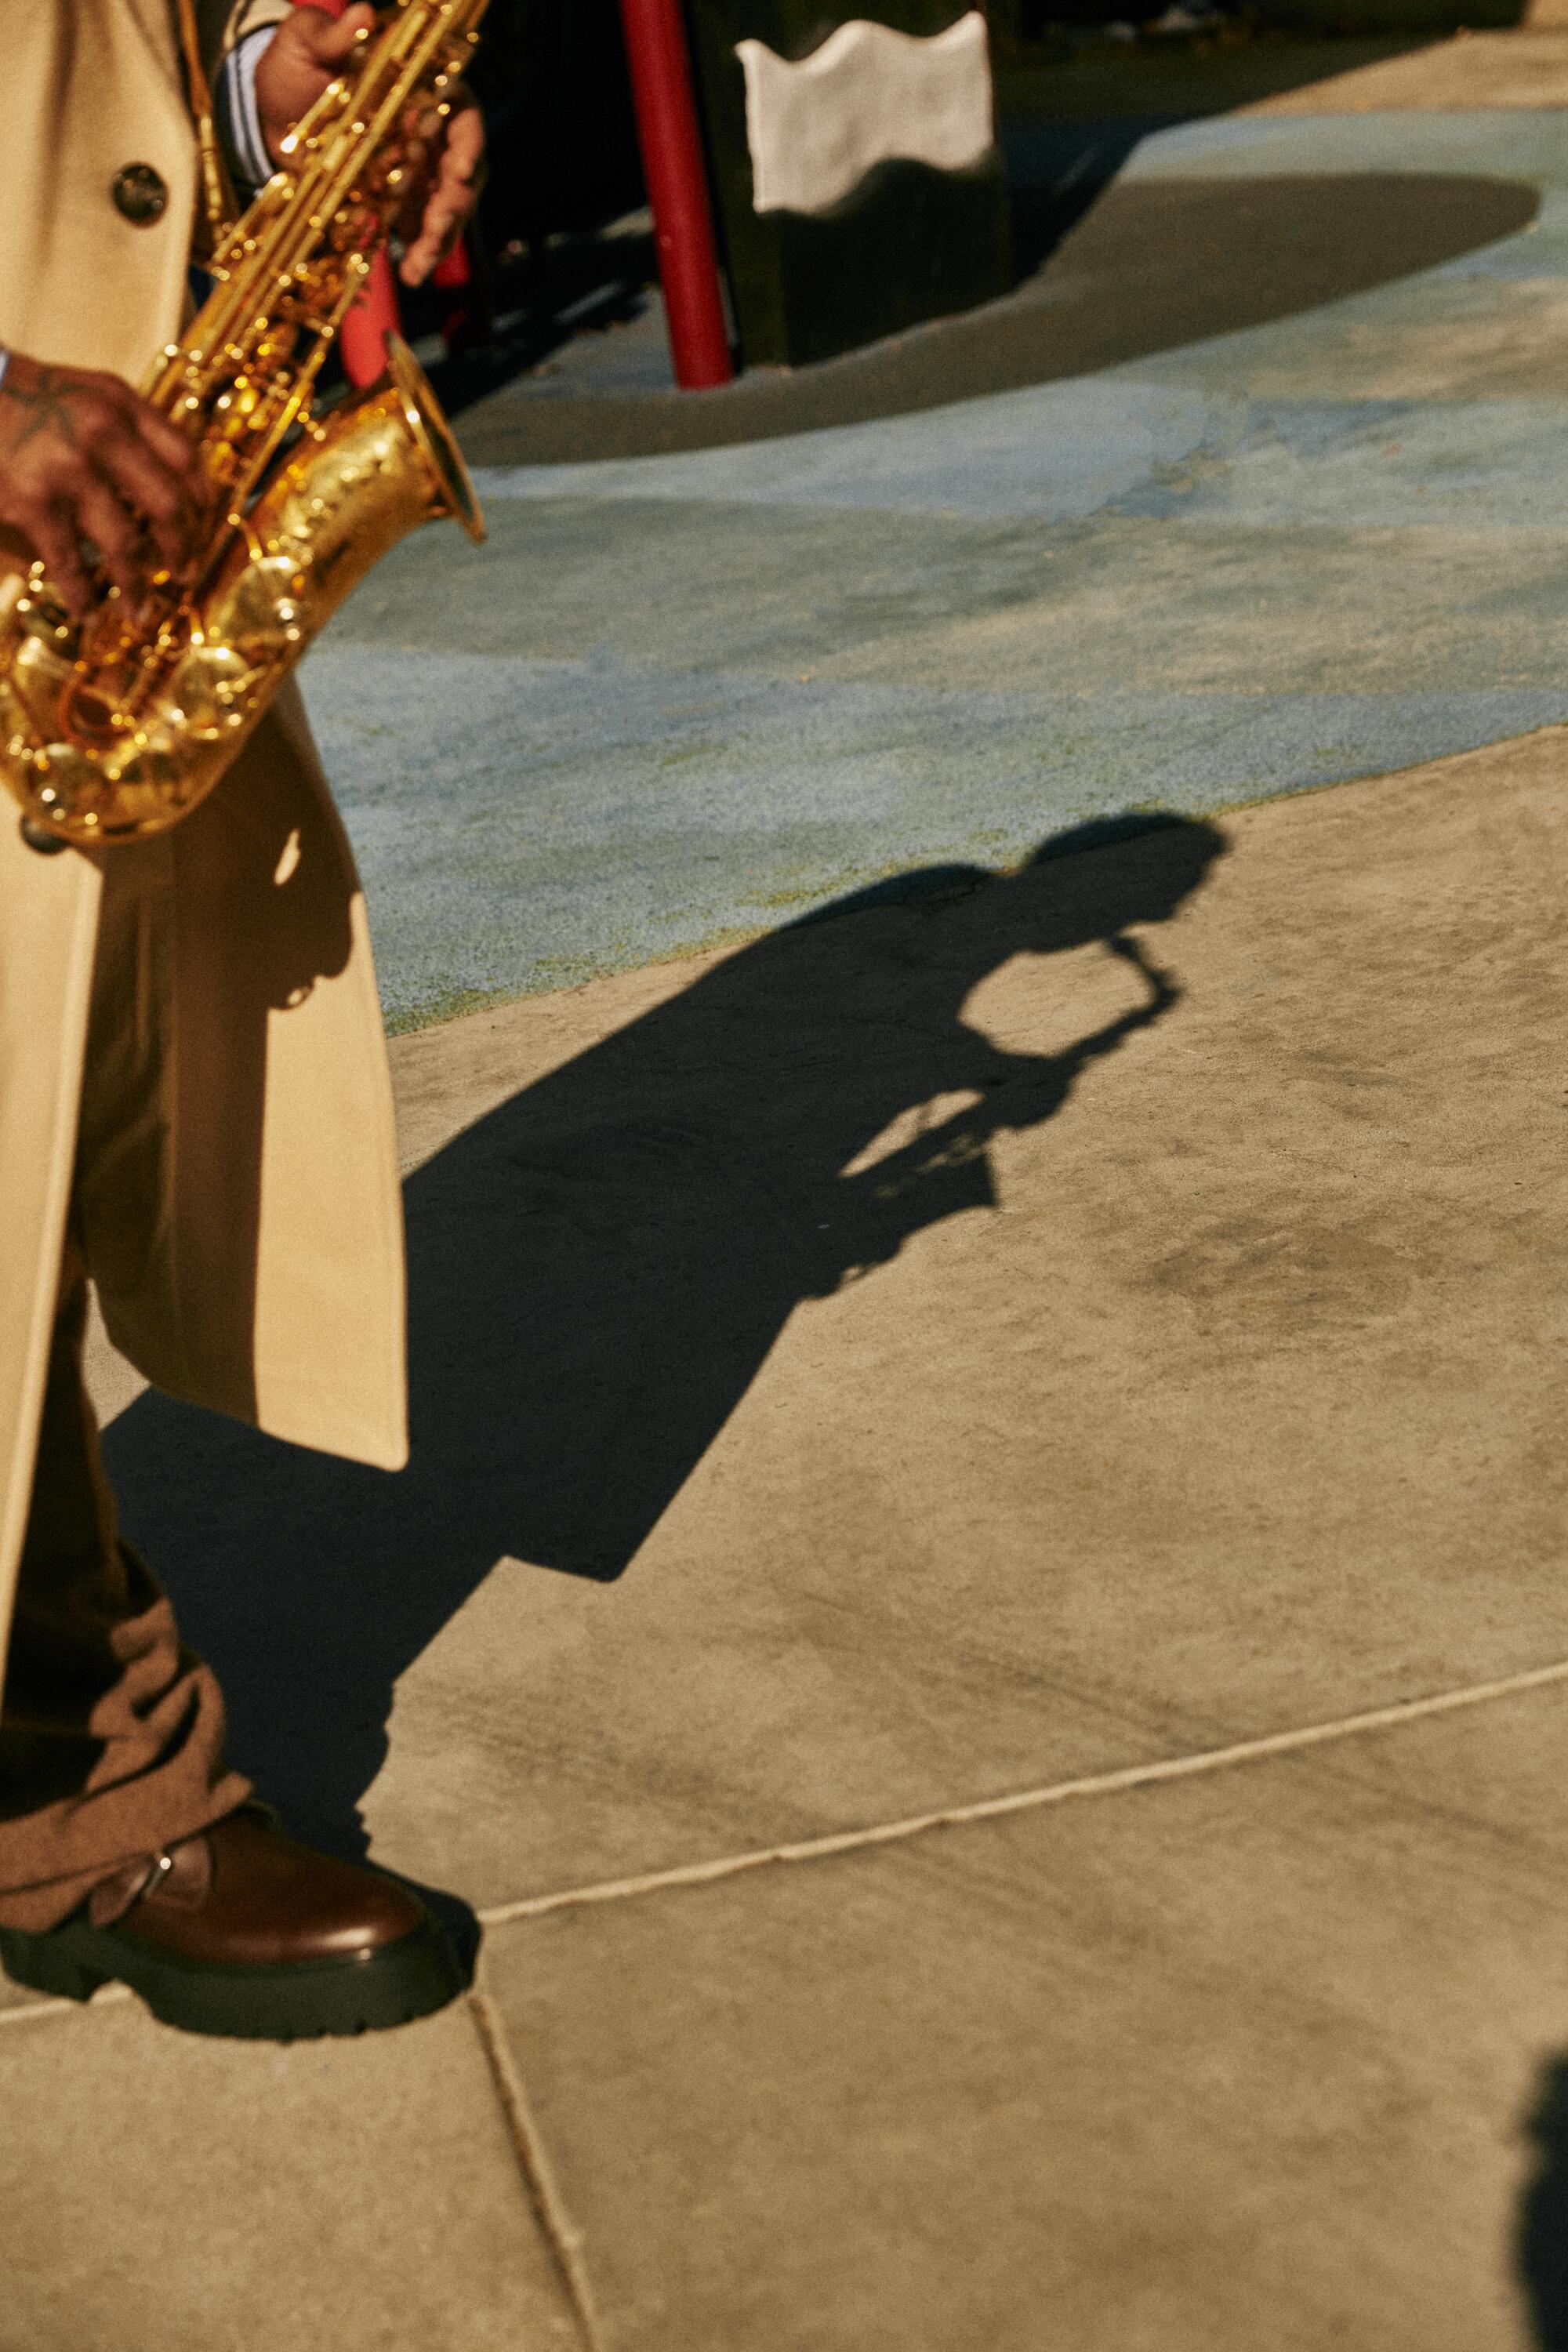 Musician plays saxophone on the street, casting a shadow.